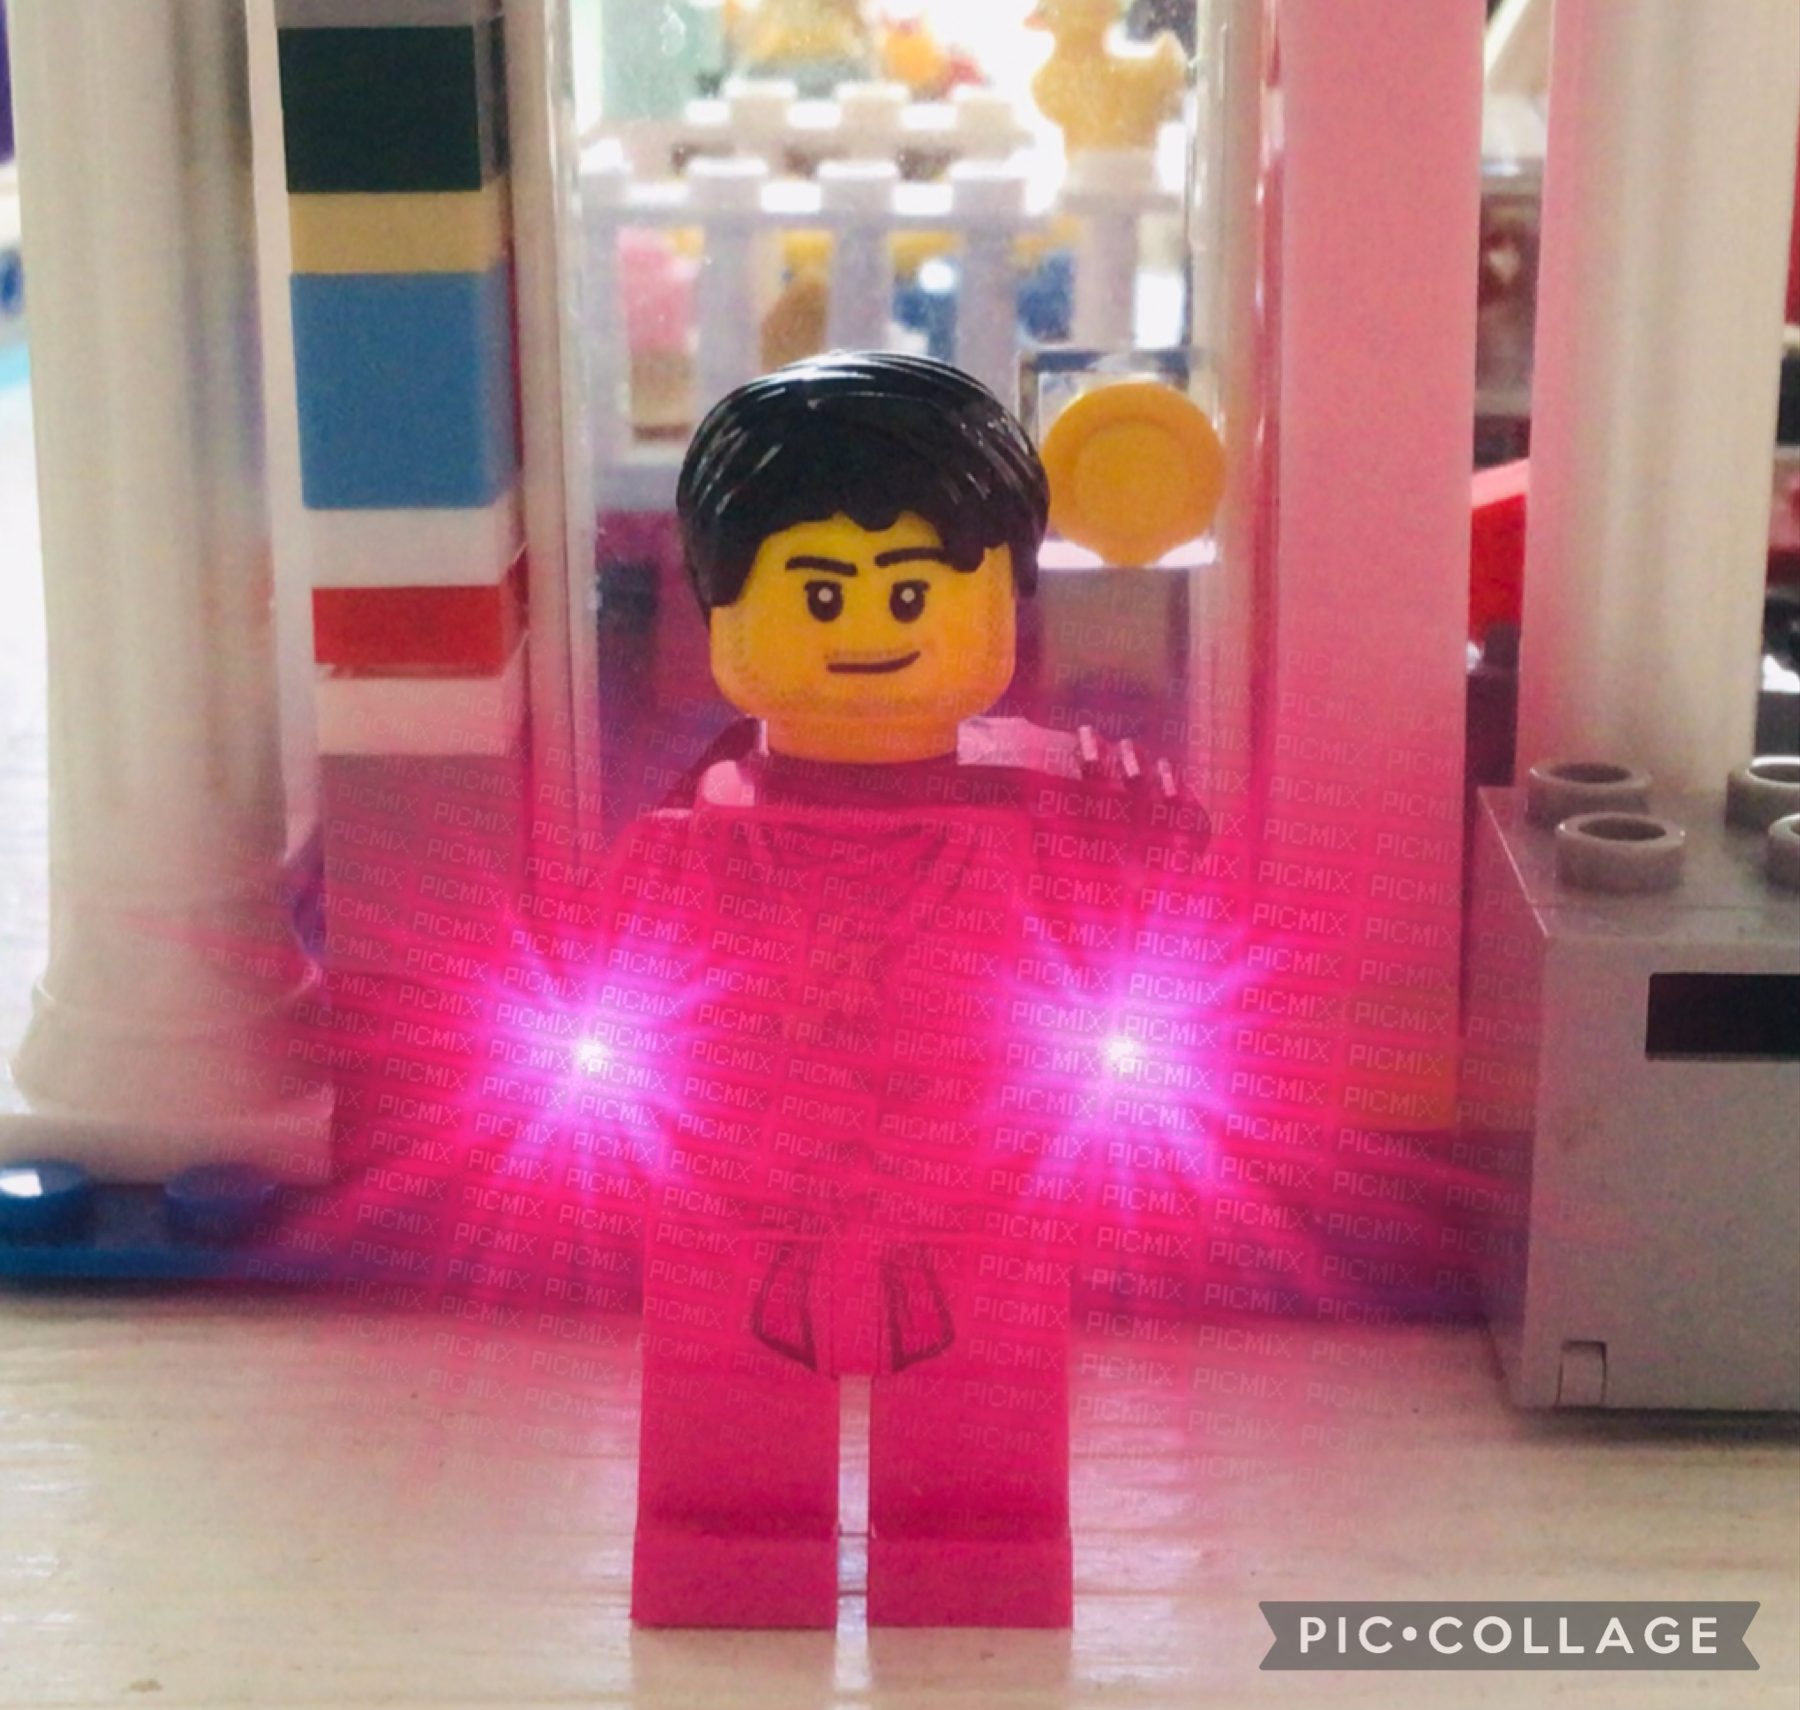 Oliver’s pink powers